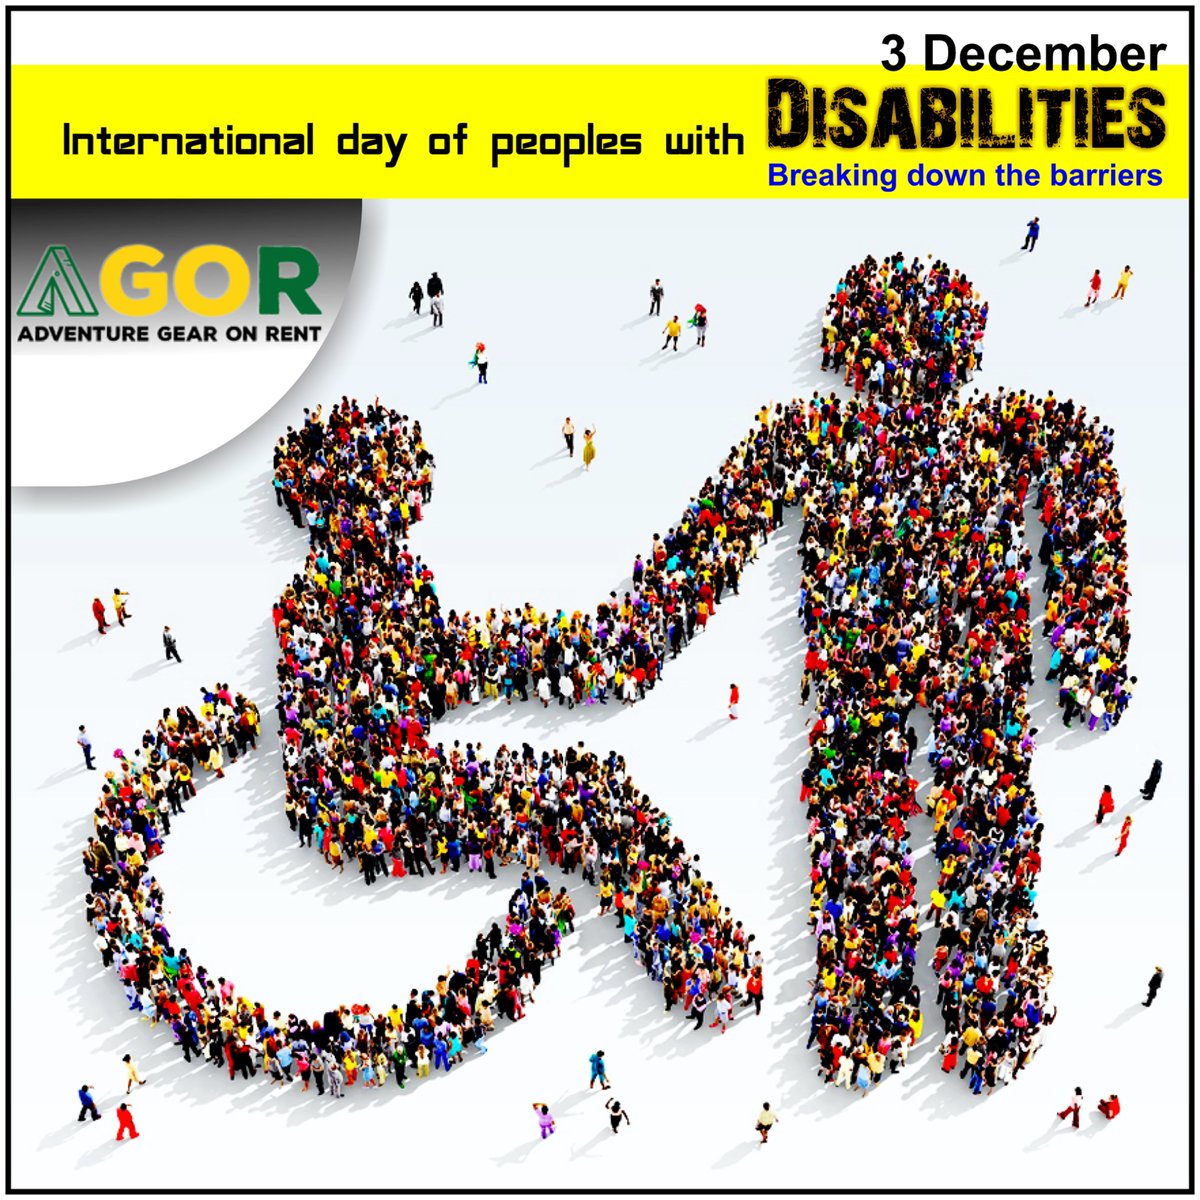 Disability Means I Am Differently Able...!

#AGOR #disability #disabilityday2019 #adventureequipments
#campingtents #campingequipments #iceclimbinggear #climbinggear #hikinggear #climbingcoaching #outdooractivity #rent #onlinestore #ForRent